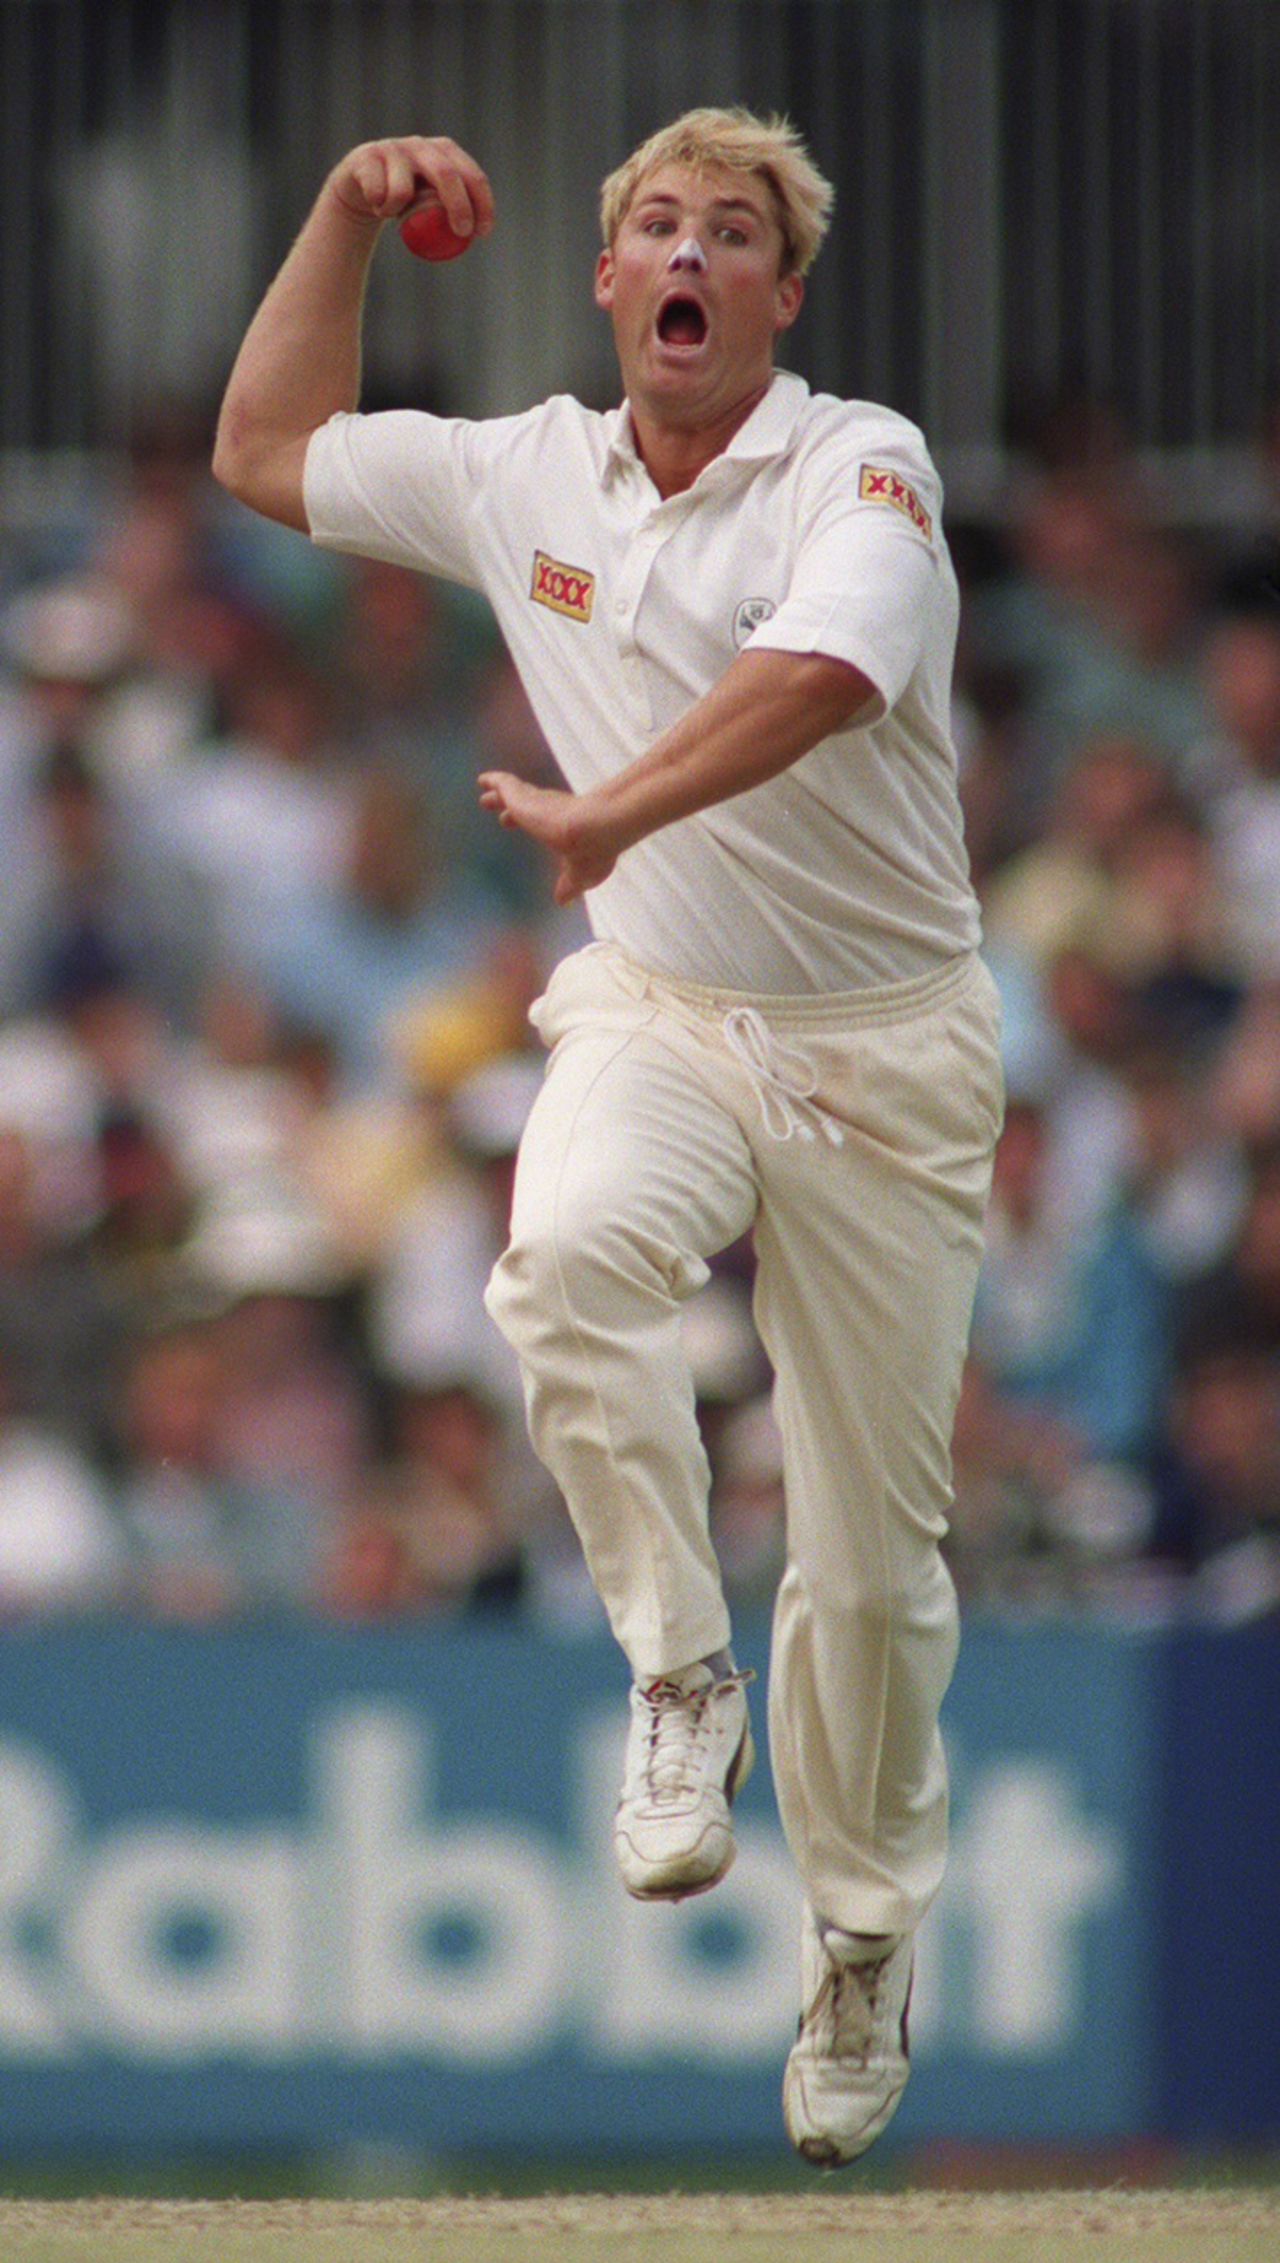 Shane Warne bowls in the first match of the 1993 Ashes tour, England Amateurs v Australians, Tour match, Radlett, April 30, 1993